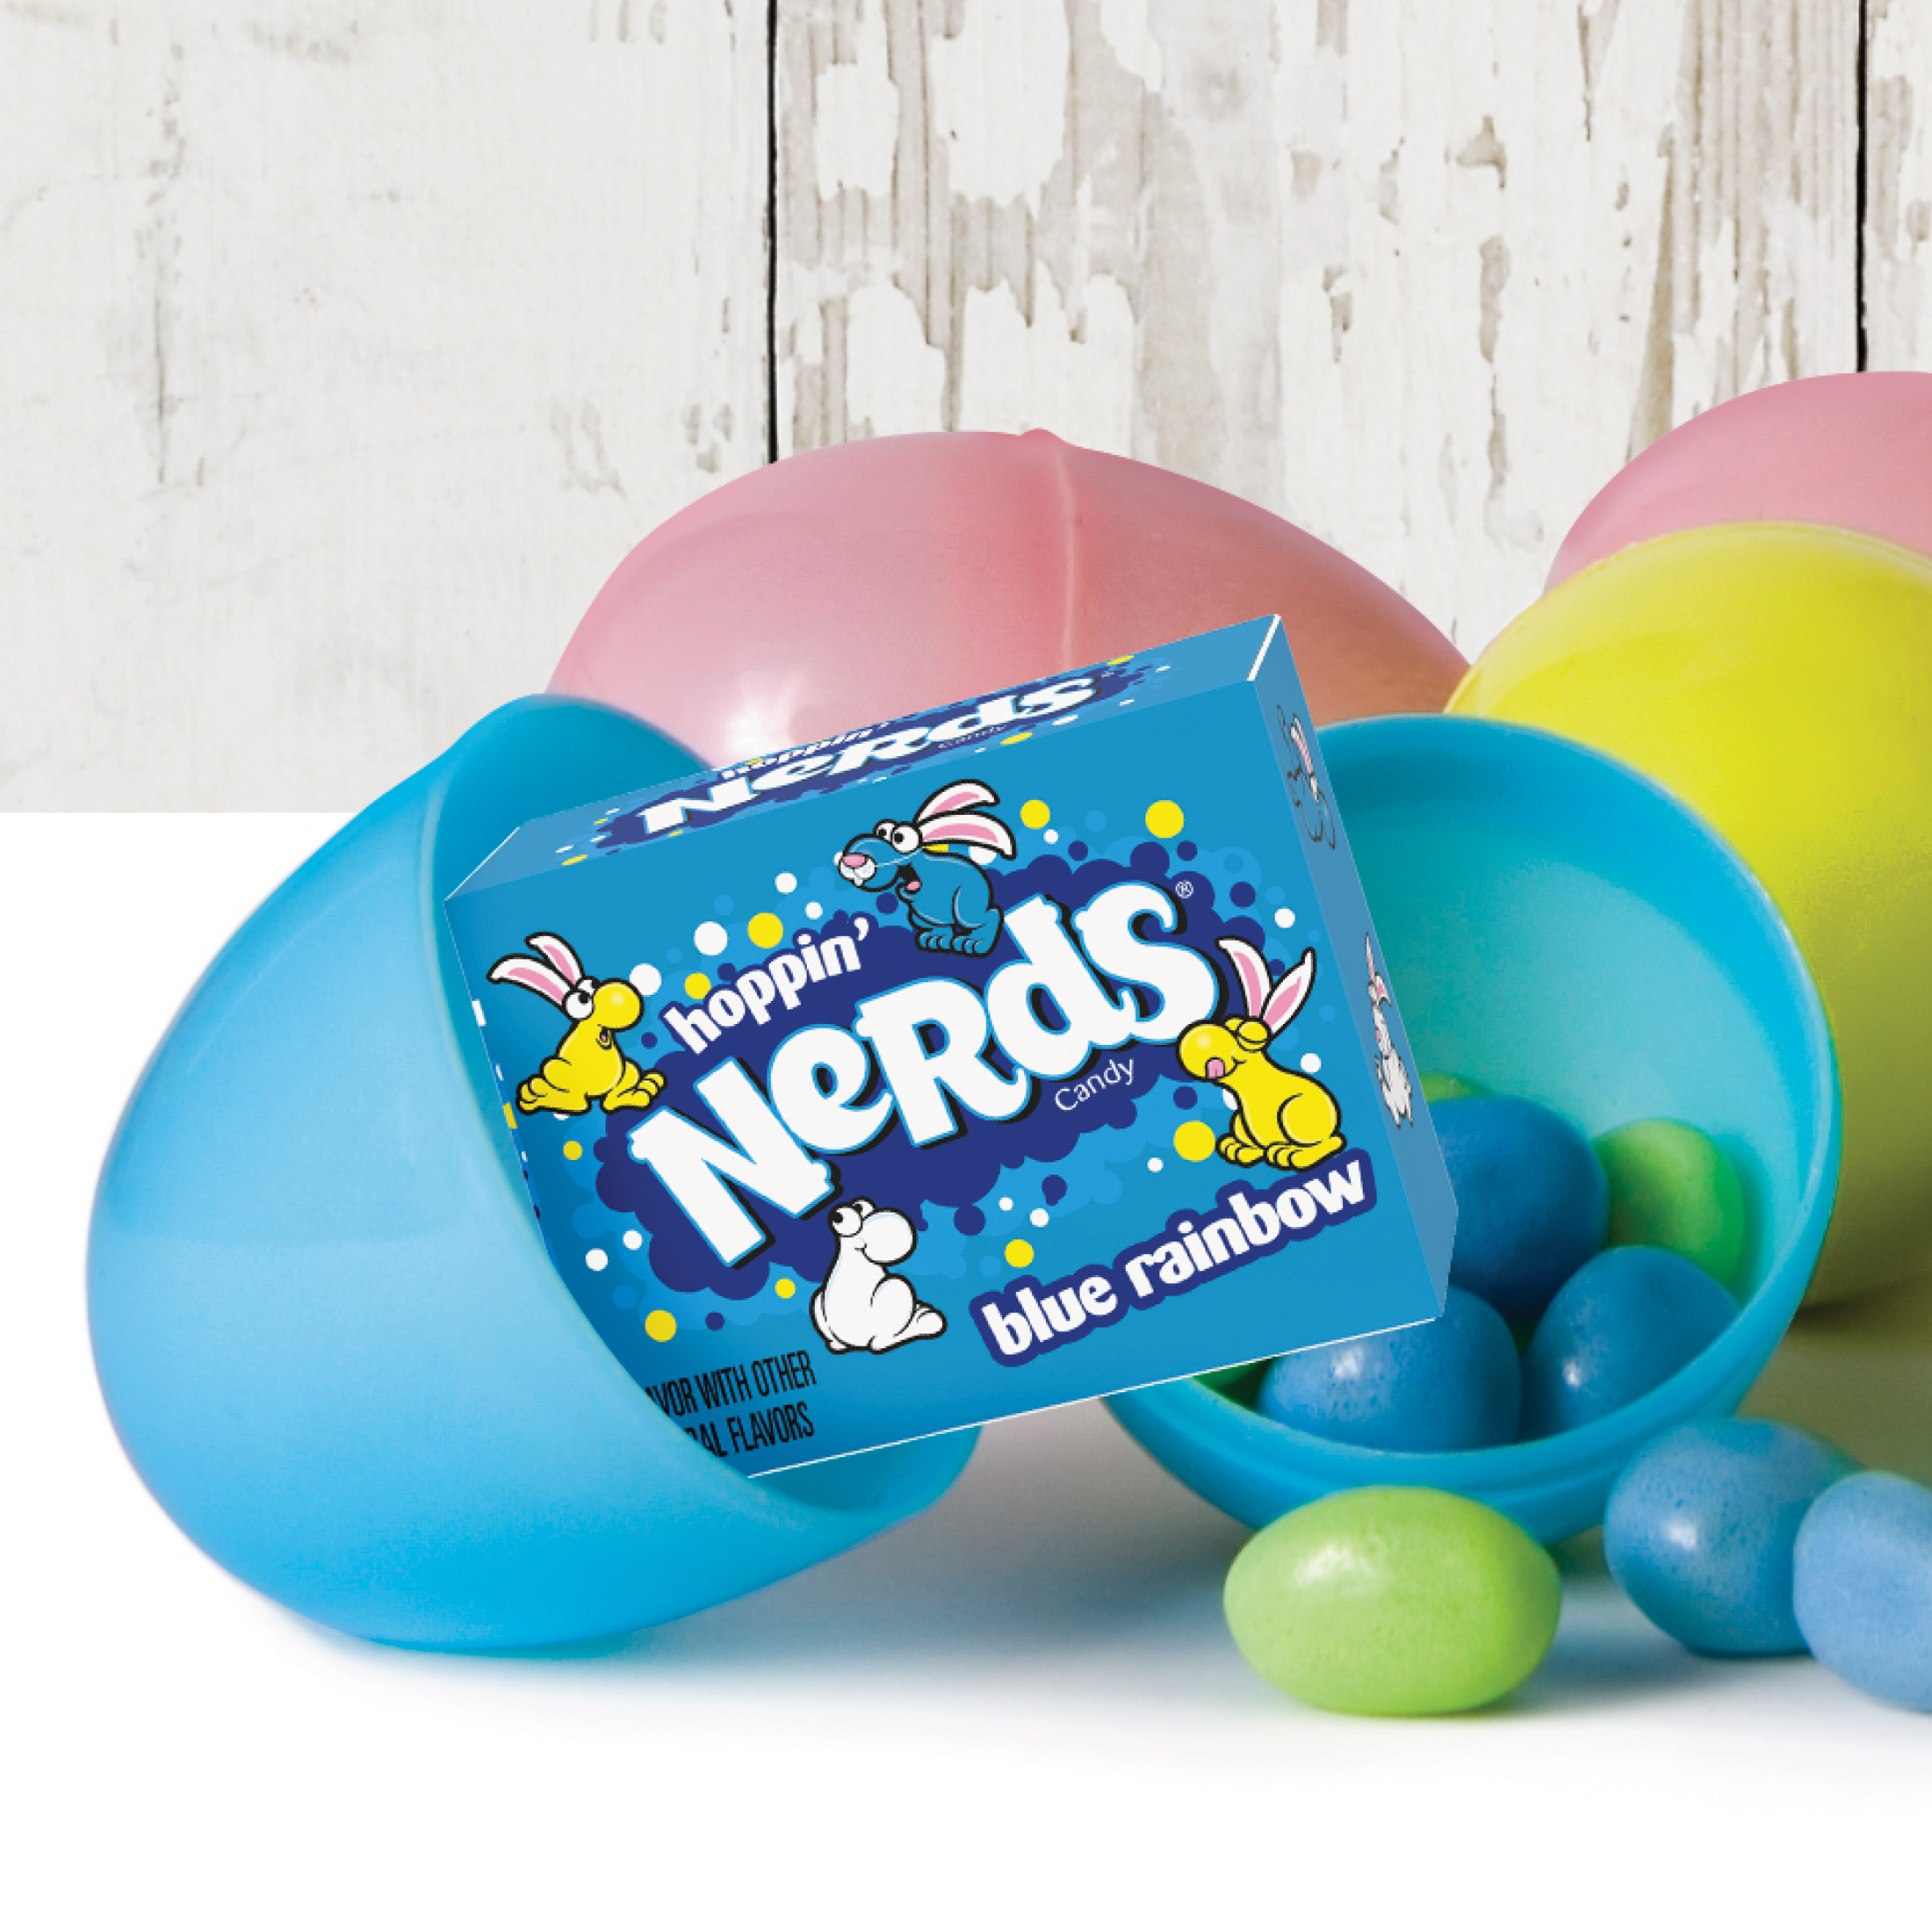 Nerds Rainbow Hoppin' Easter Fruit Flavored Candy Mini Boxes, 6.15 oz - image 5 of 7